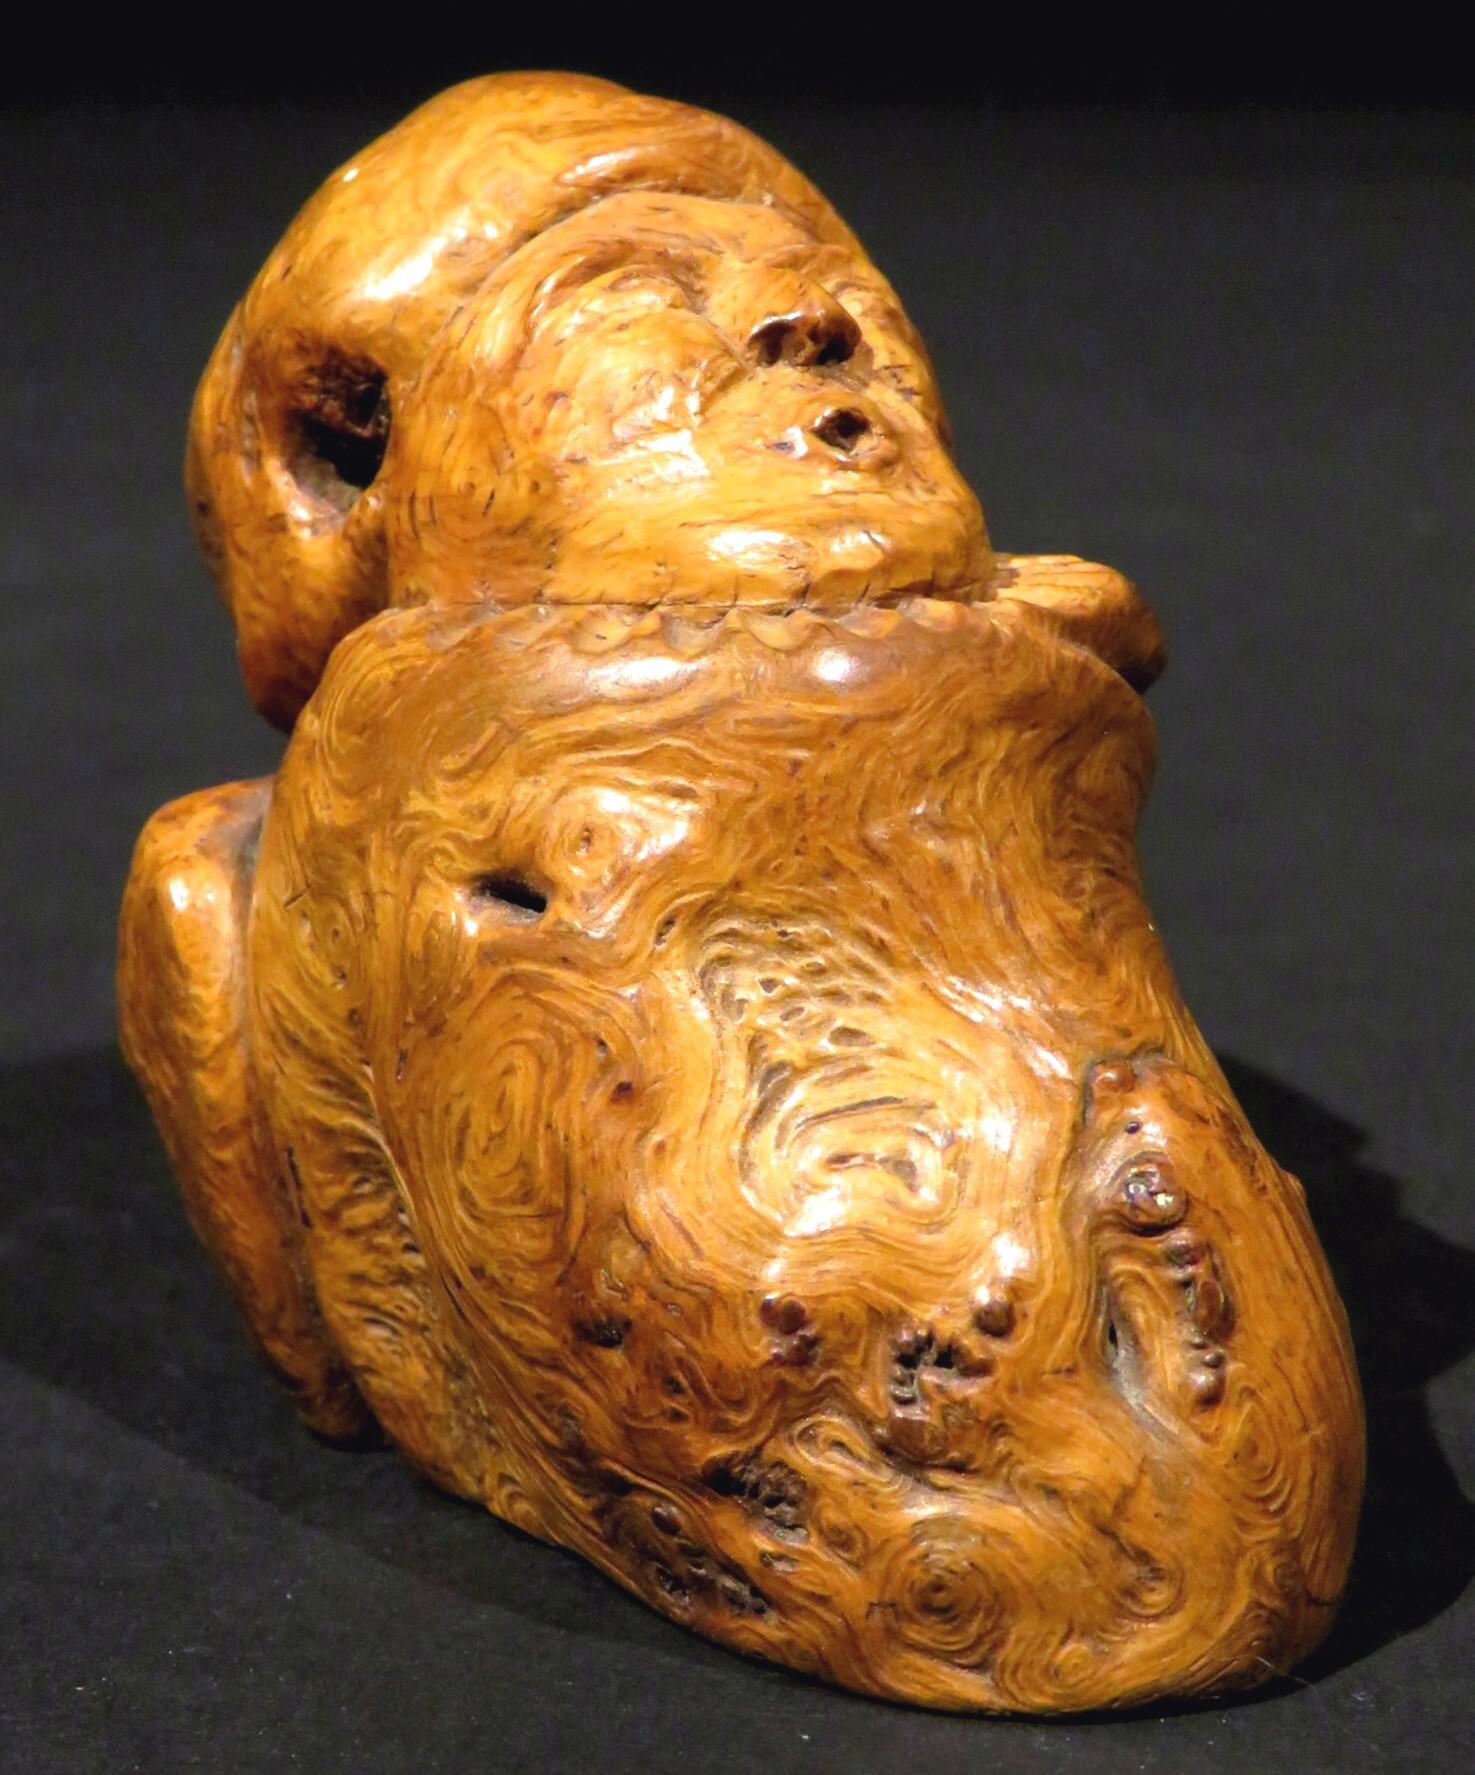 A most fascinating and intriguing hand carved objet d'art of a treen figure in burl wood, exhibiting wonderful form, grain, colour and patina. The underside bearing remnants of an old paper label with hand written script together with the numerals